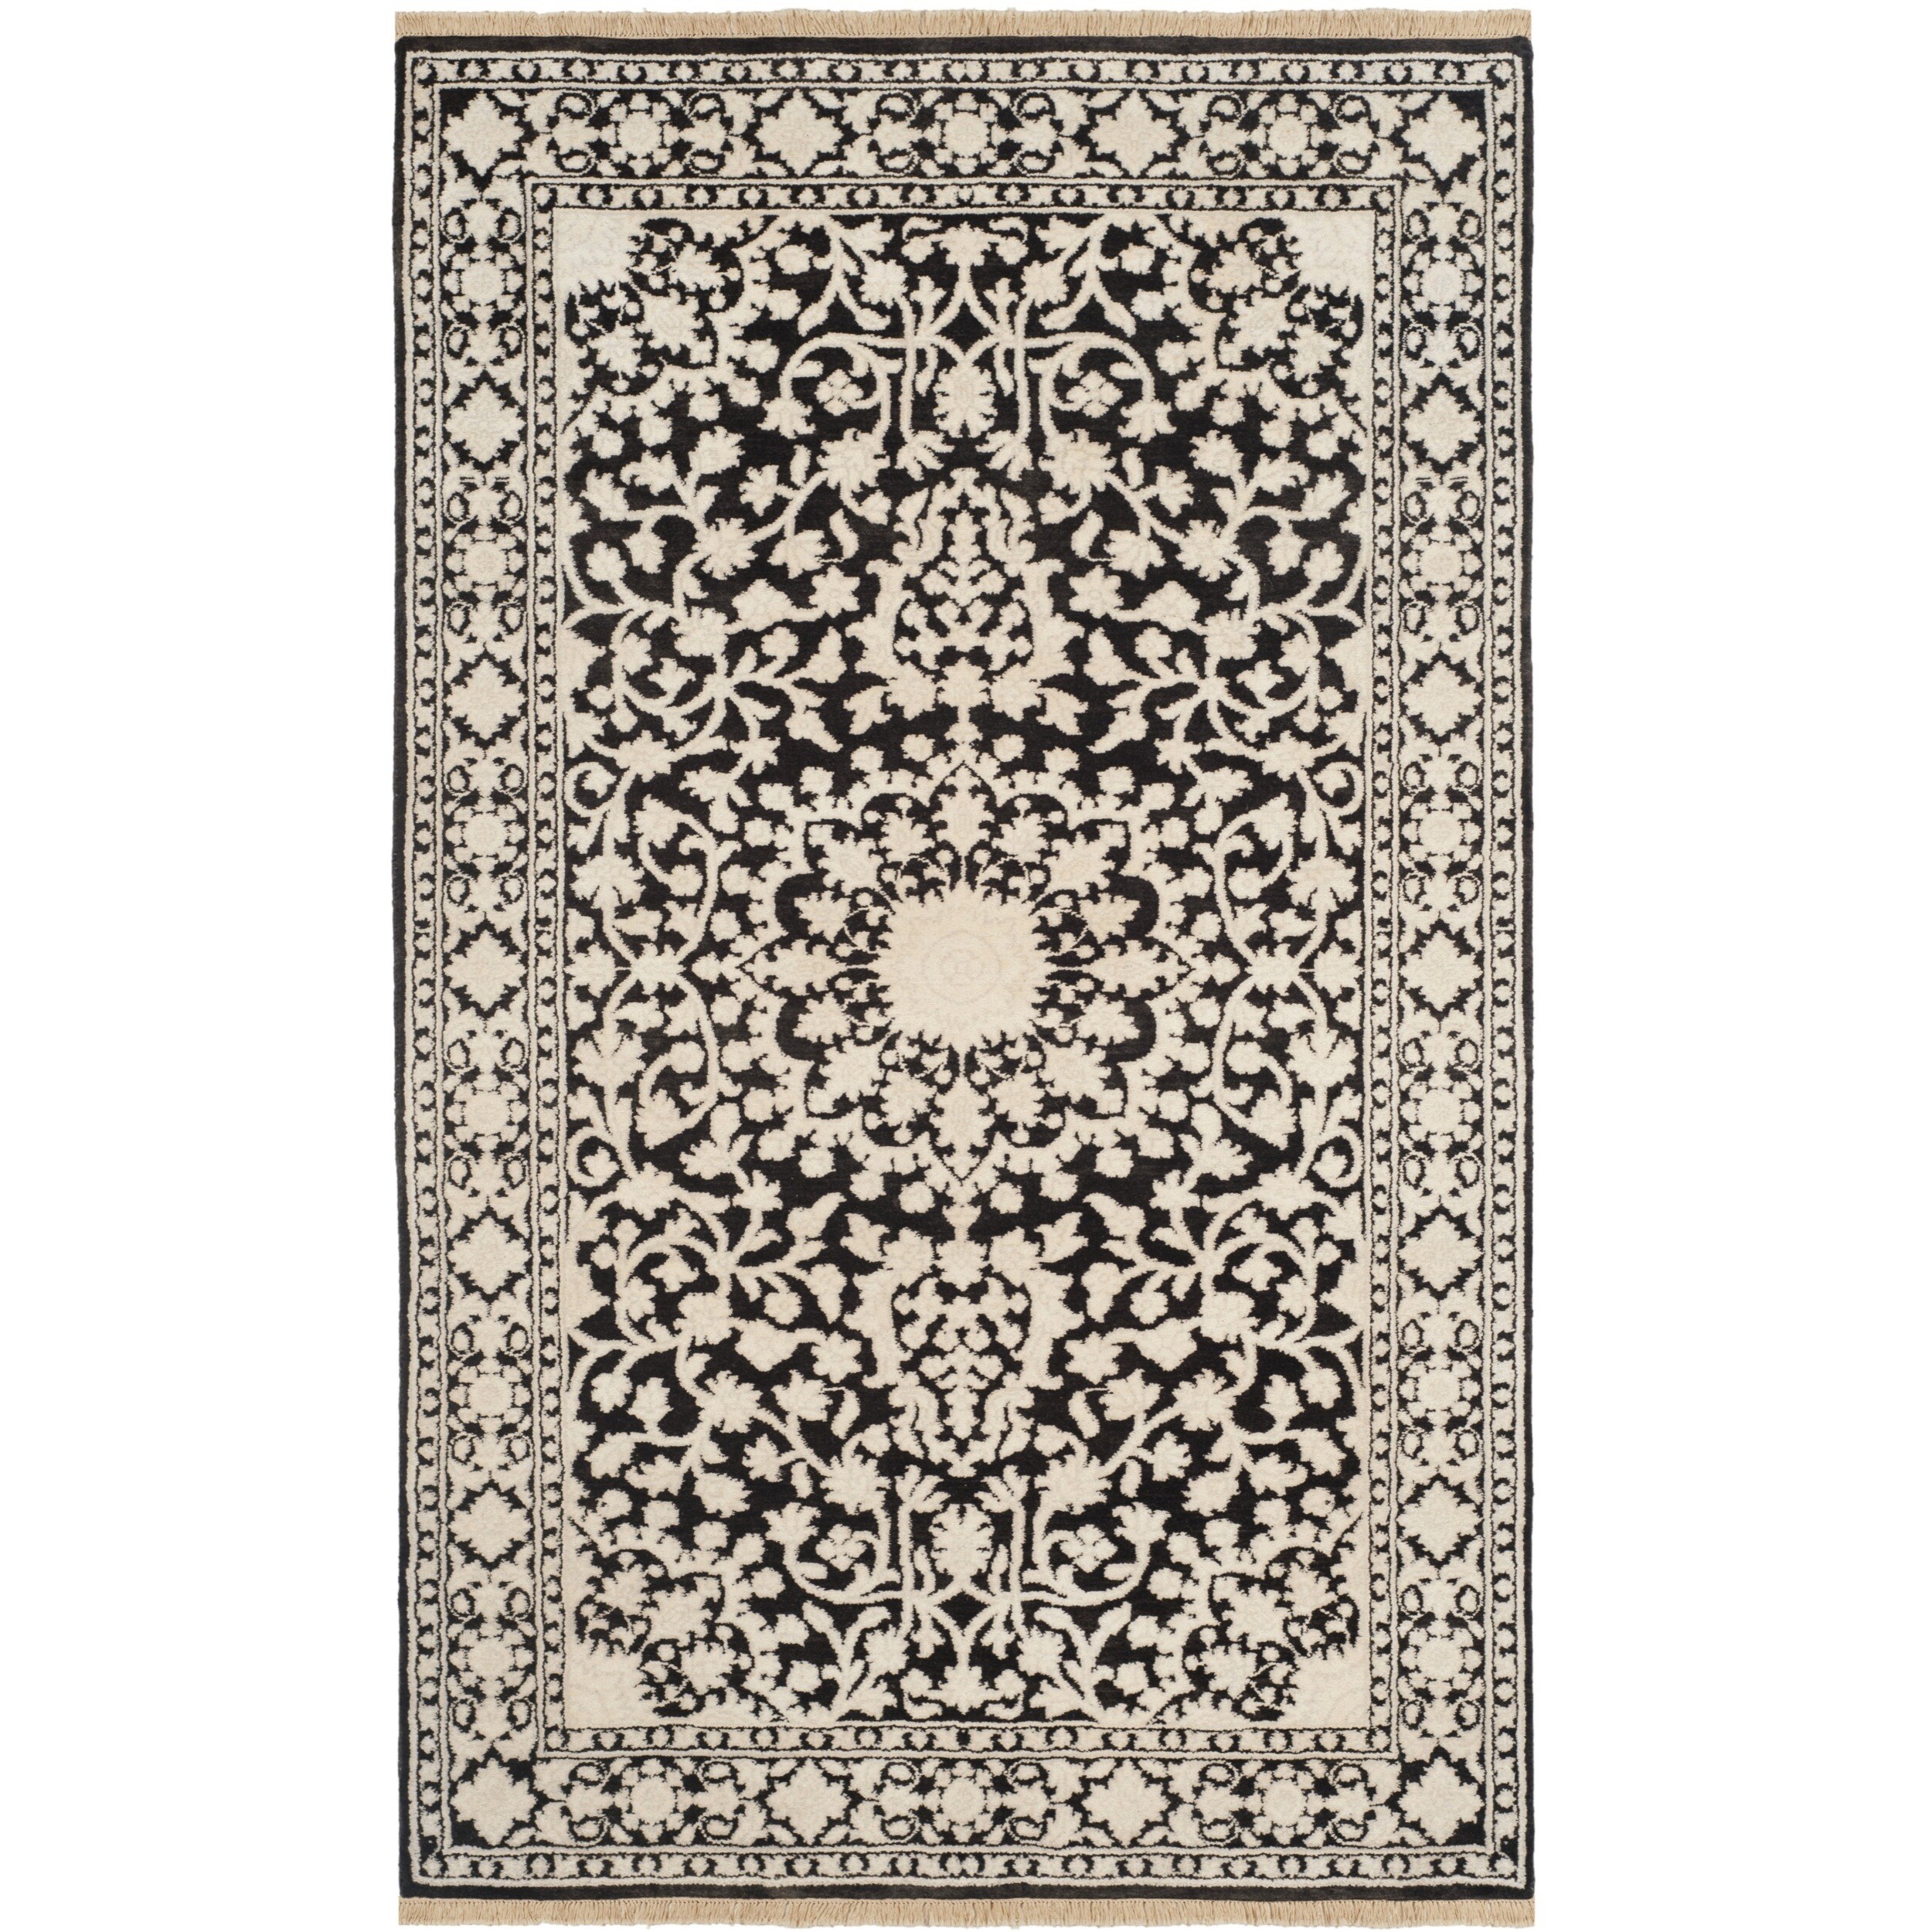 Safavieh Hand knotted Ganges River Black/ Ivory Wool Rug (3 X 5)